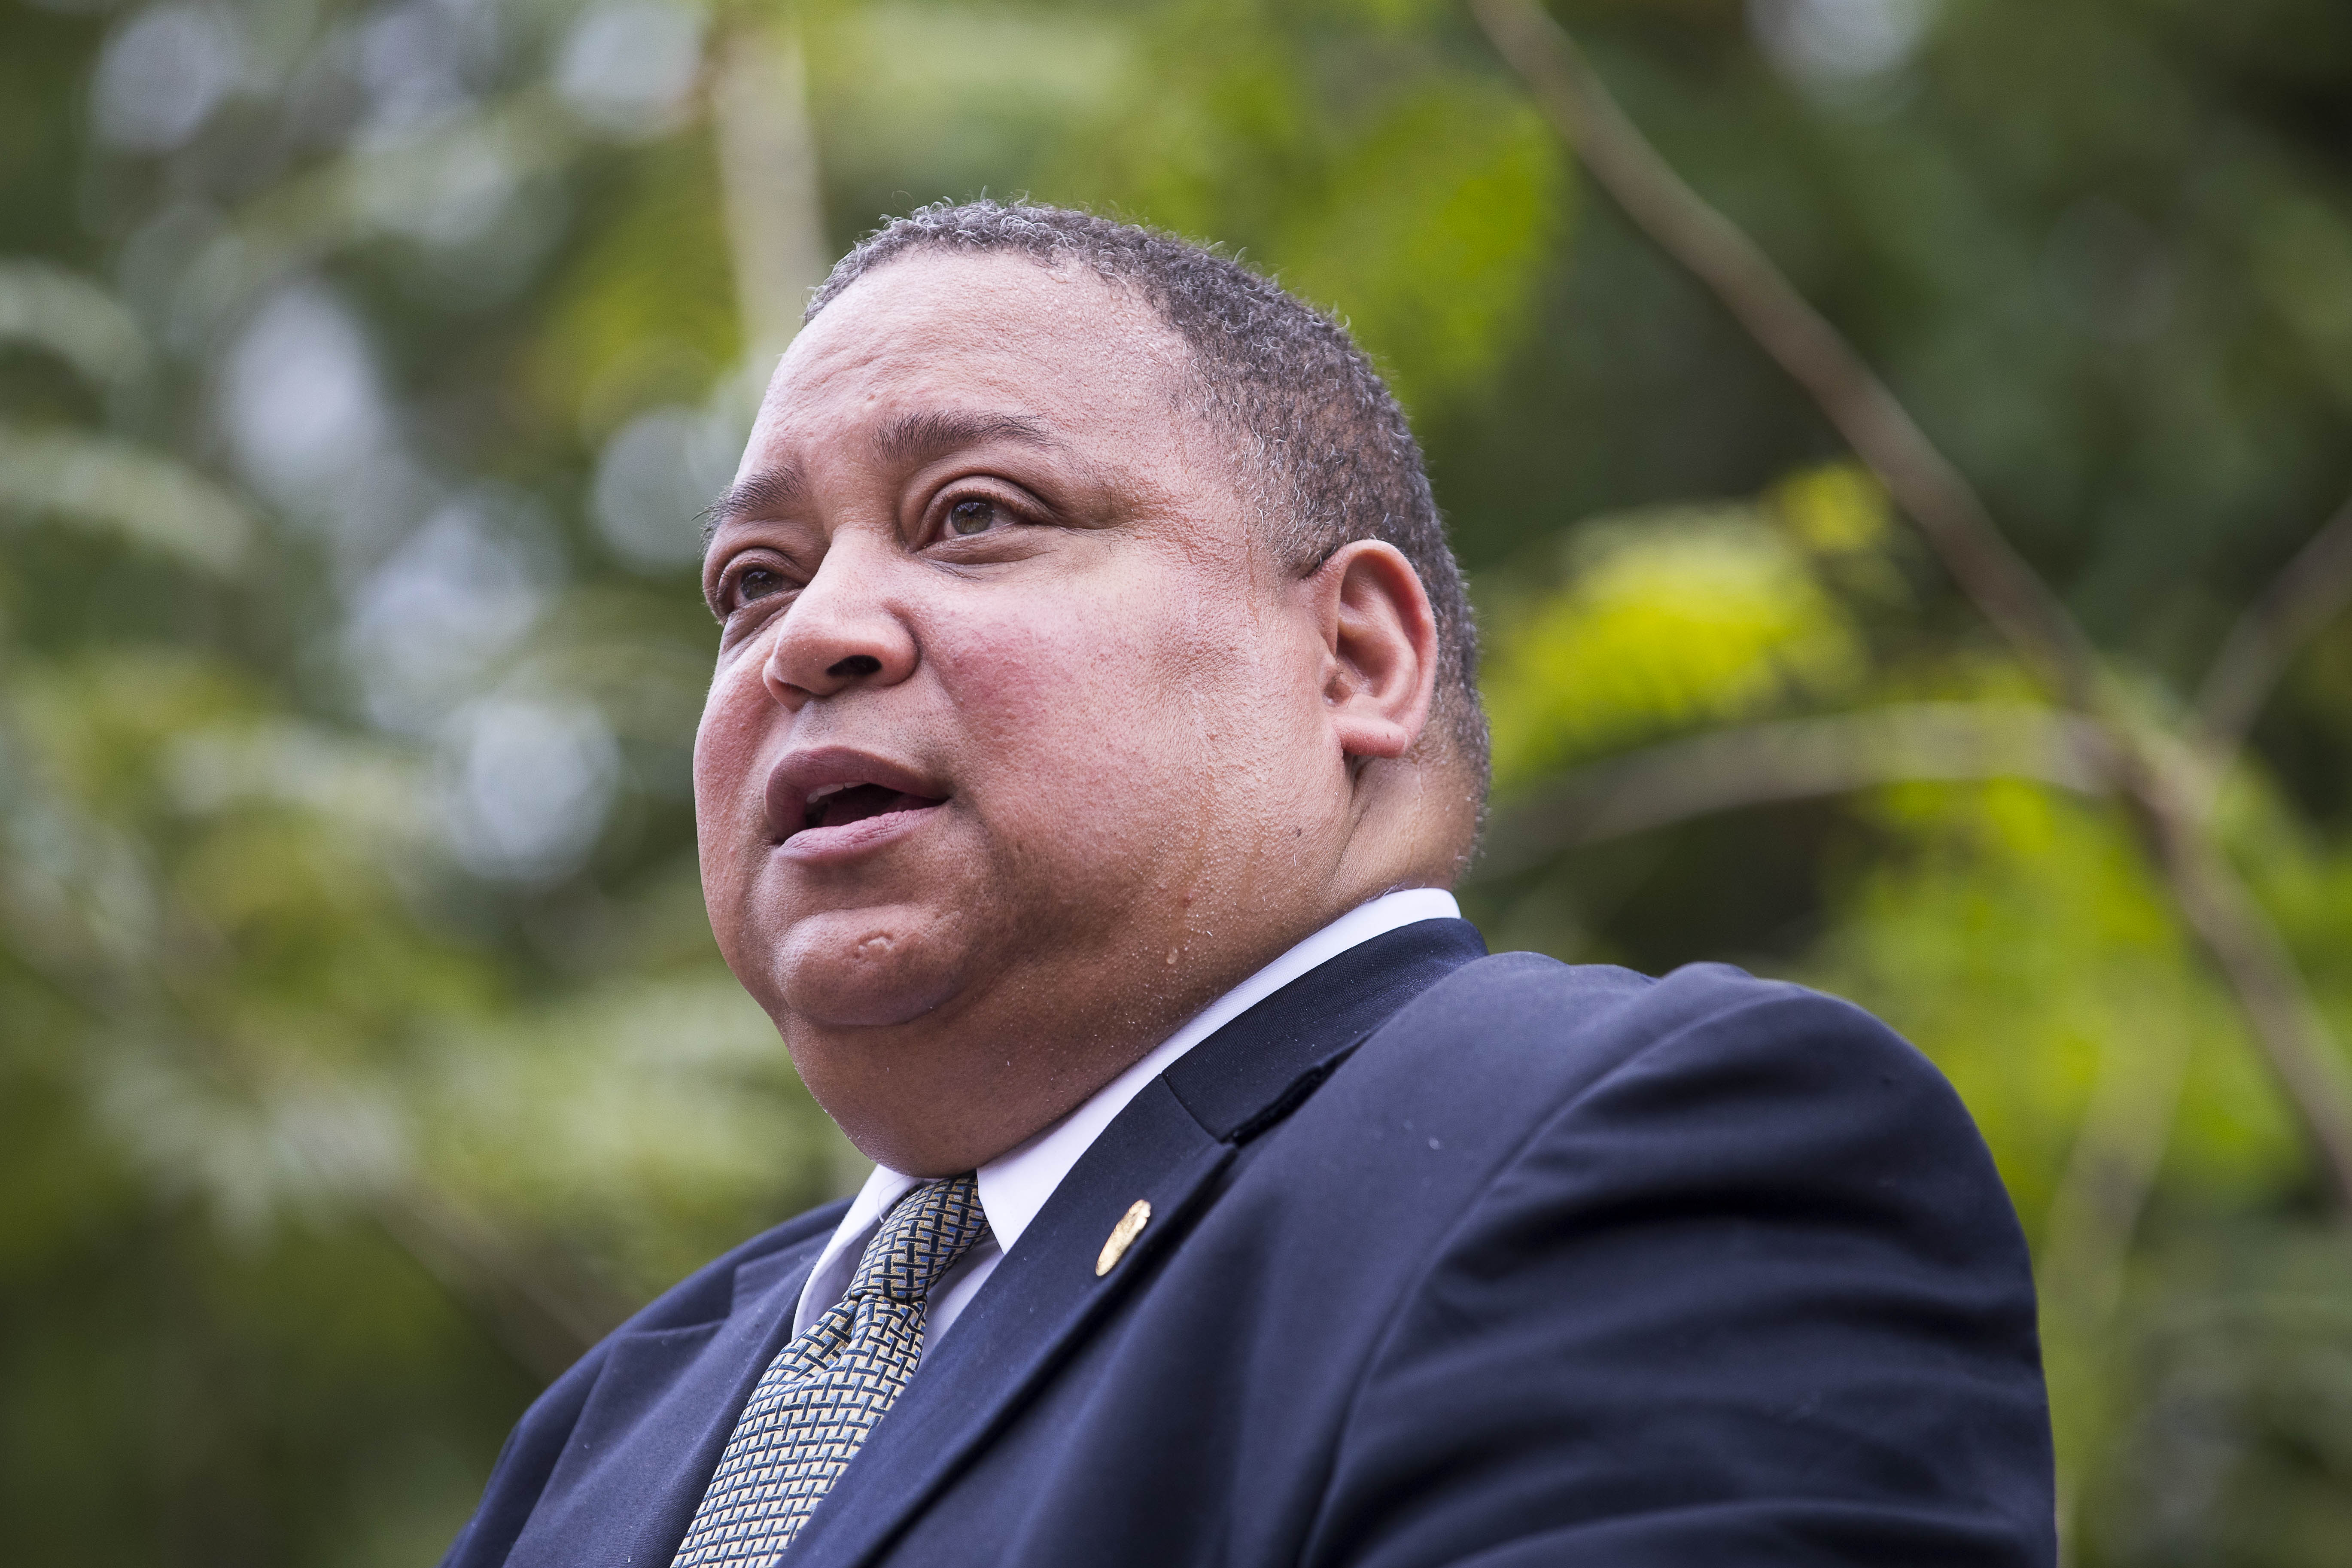 Atlanta City Councilman Says He Can T Pay 39 000 Ethics Fine